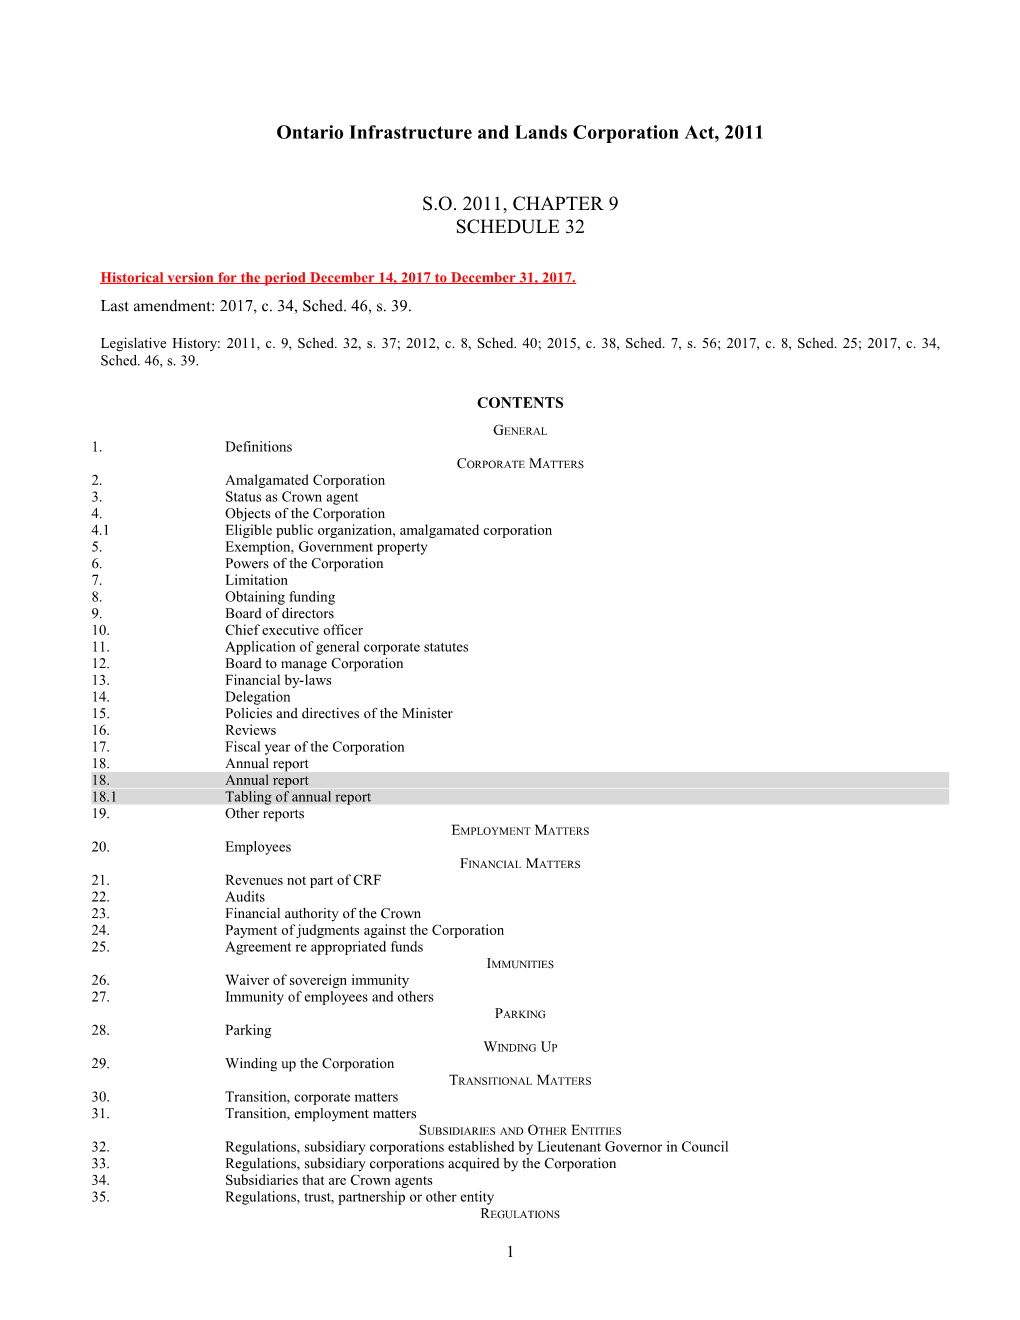 Ontario Infrastructure and Lands Corporation Act, 2011, S.O. 2011, C. 9, Sched. 32